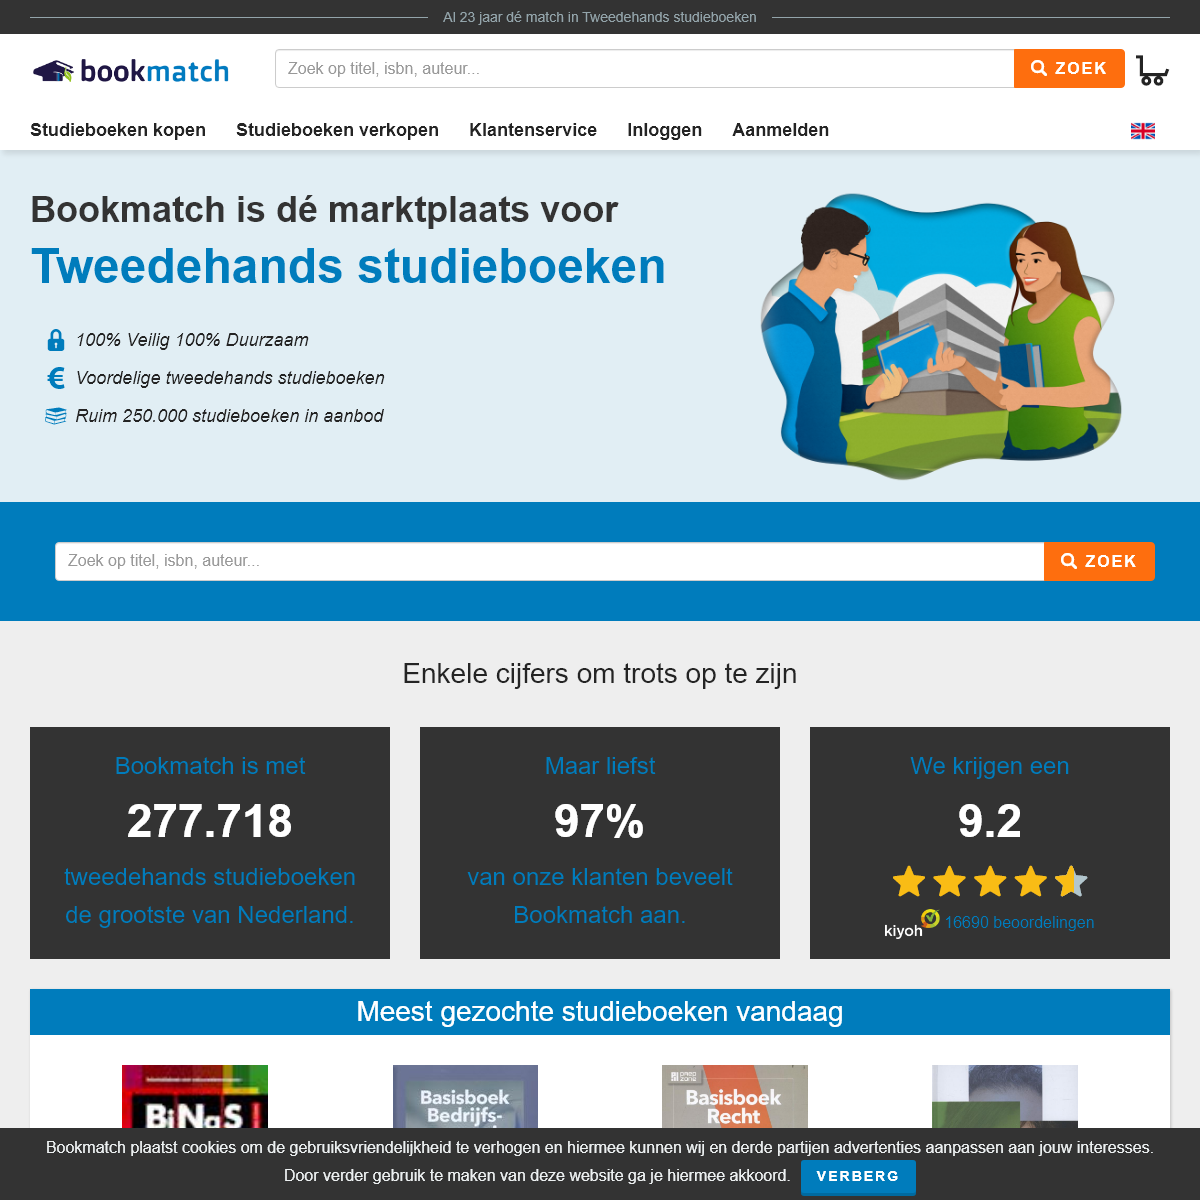 A complete backup of bookmatch.nl